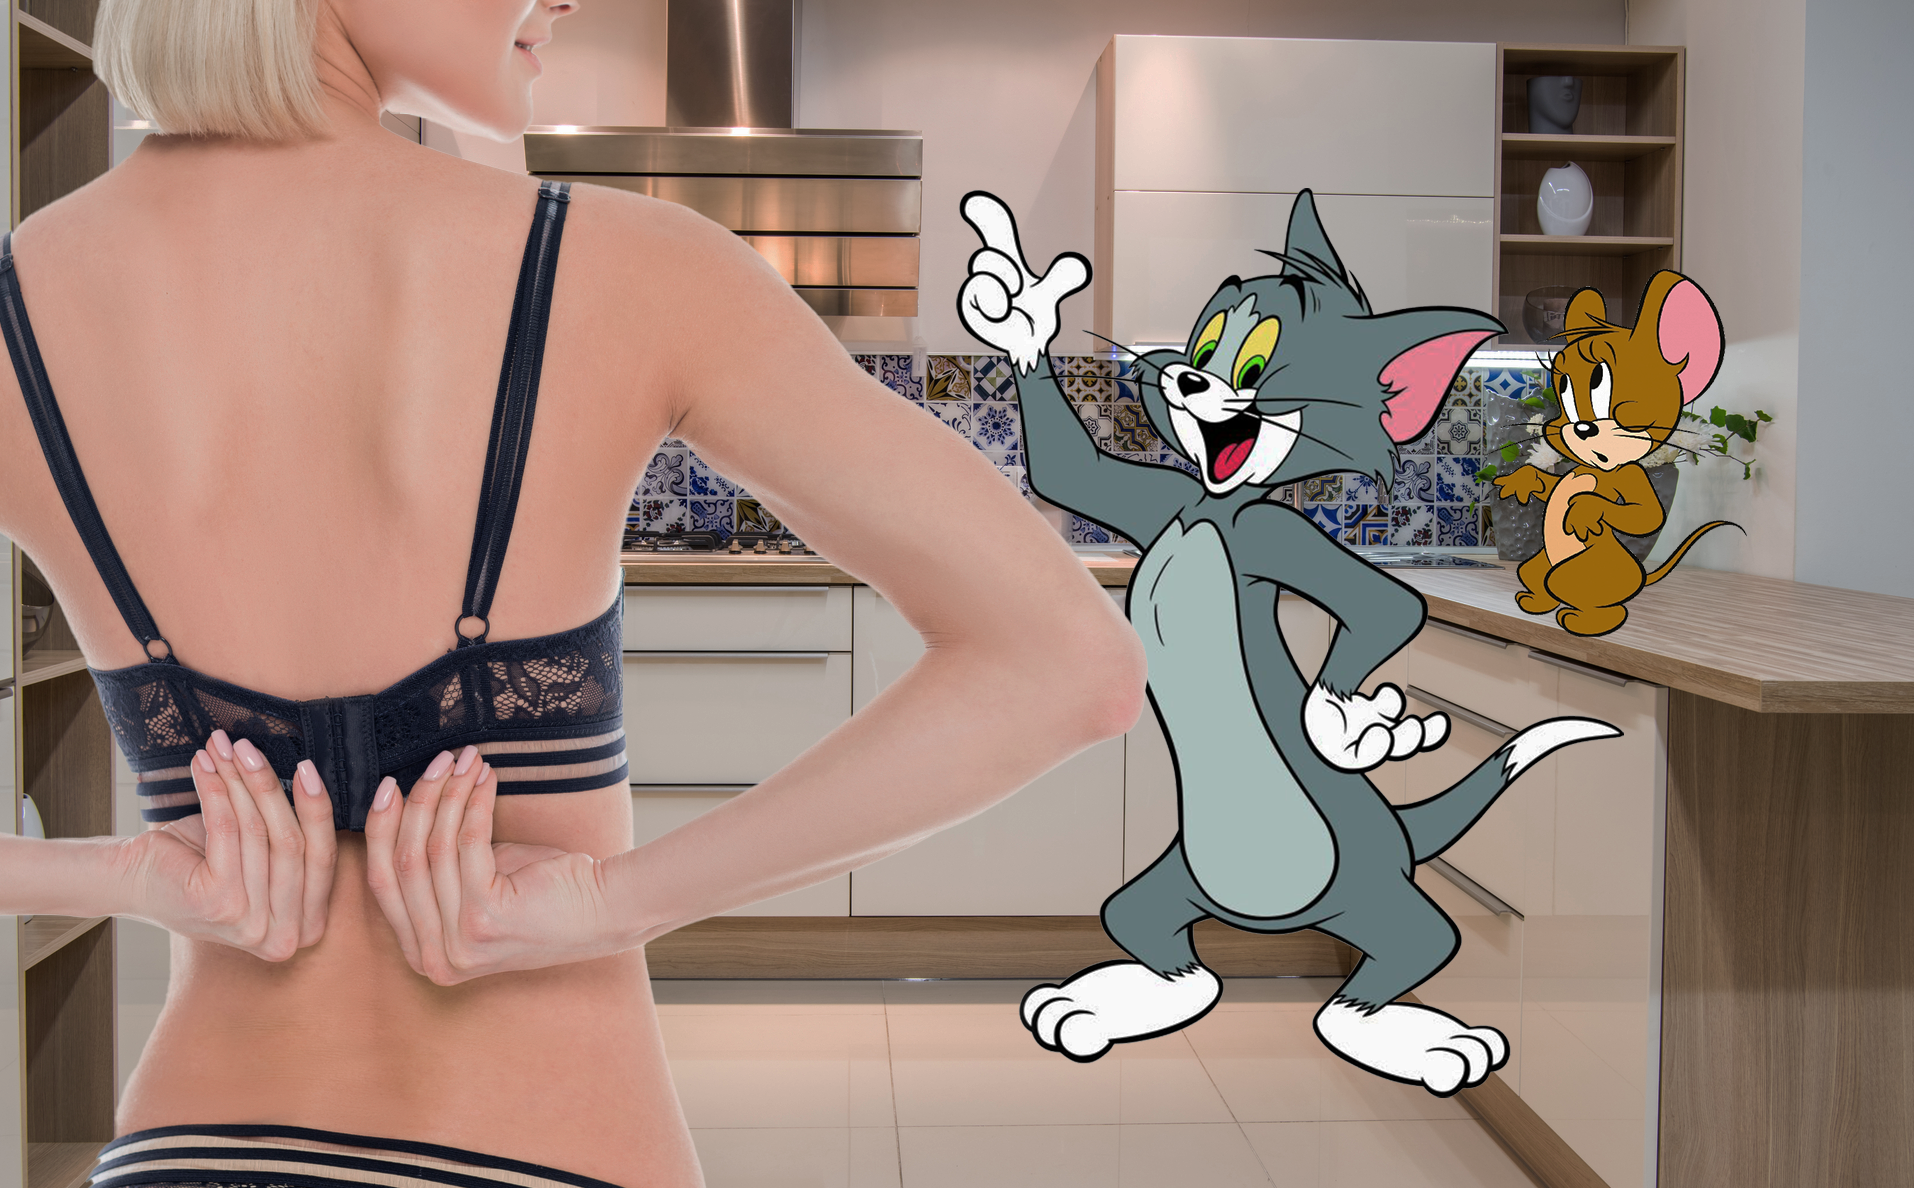 Tom And Jerry The Movie Porn - Warner Bros. adds additional boob shots to new Tom and Jerry movie to  adhere to HBOMax guidelines - The Beaverton